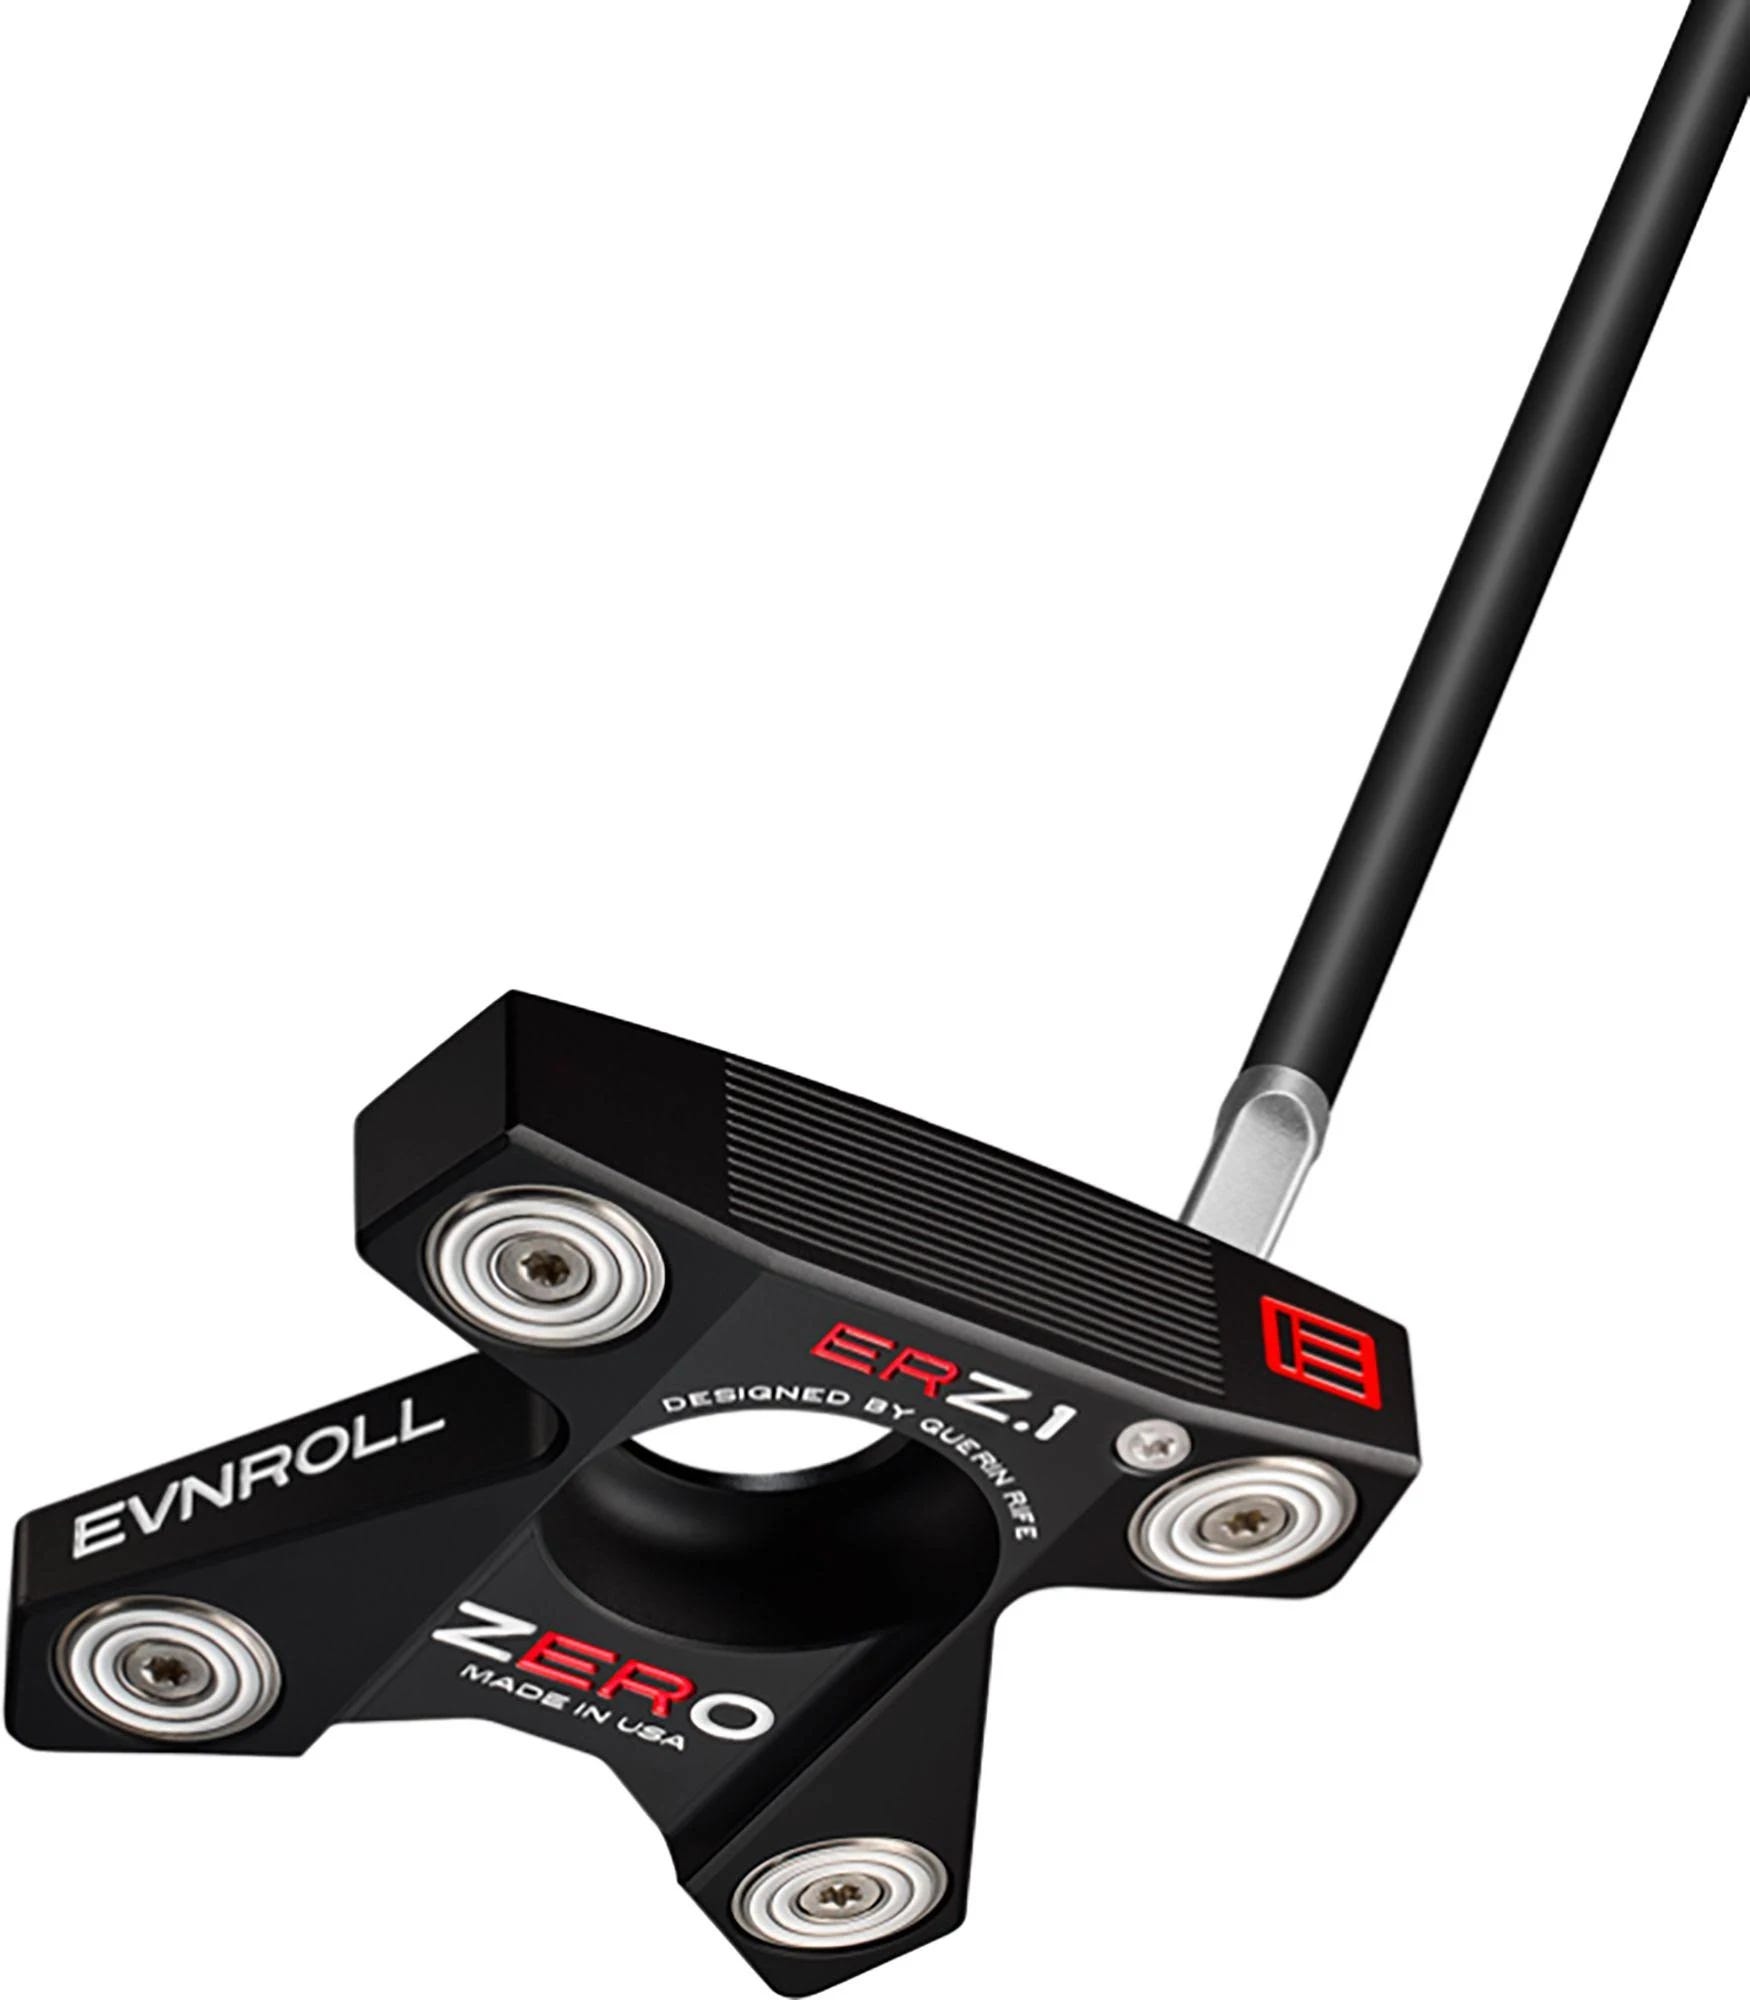 New Evnroll ER ZERO Z.1 Putter: Powerful Alignment, Extreme Stability, Unrivaled Accuracy | Image